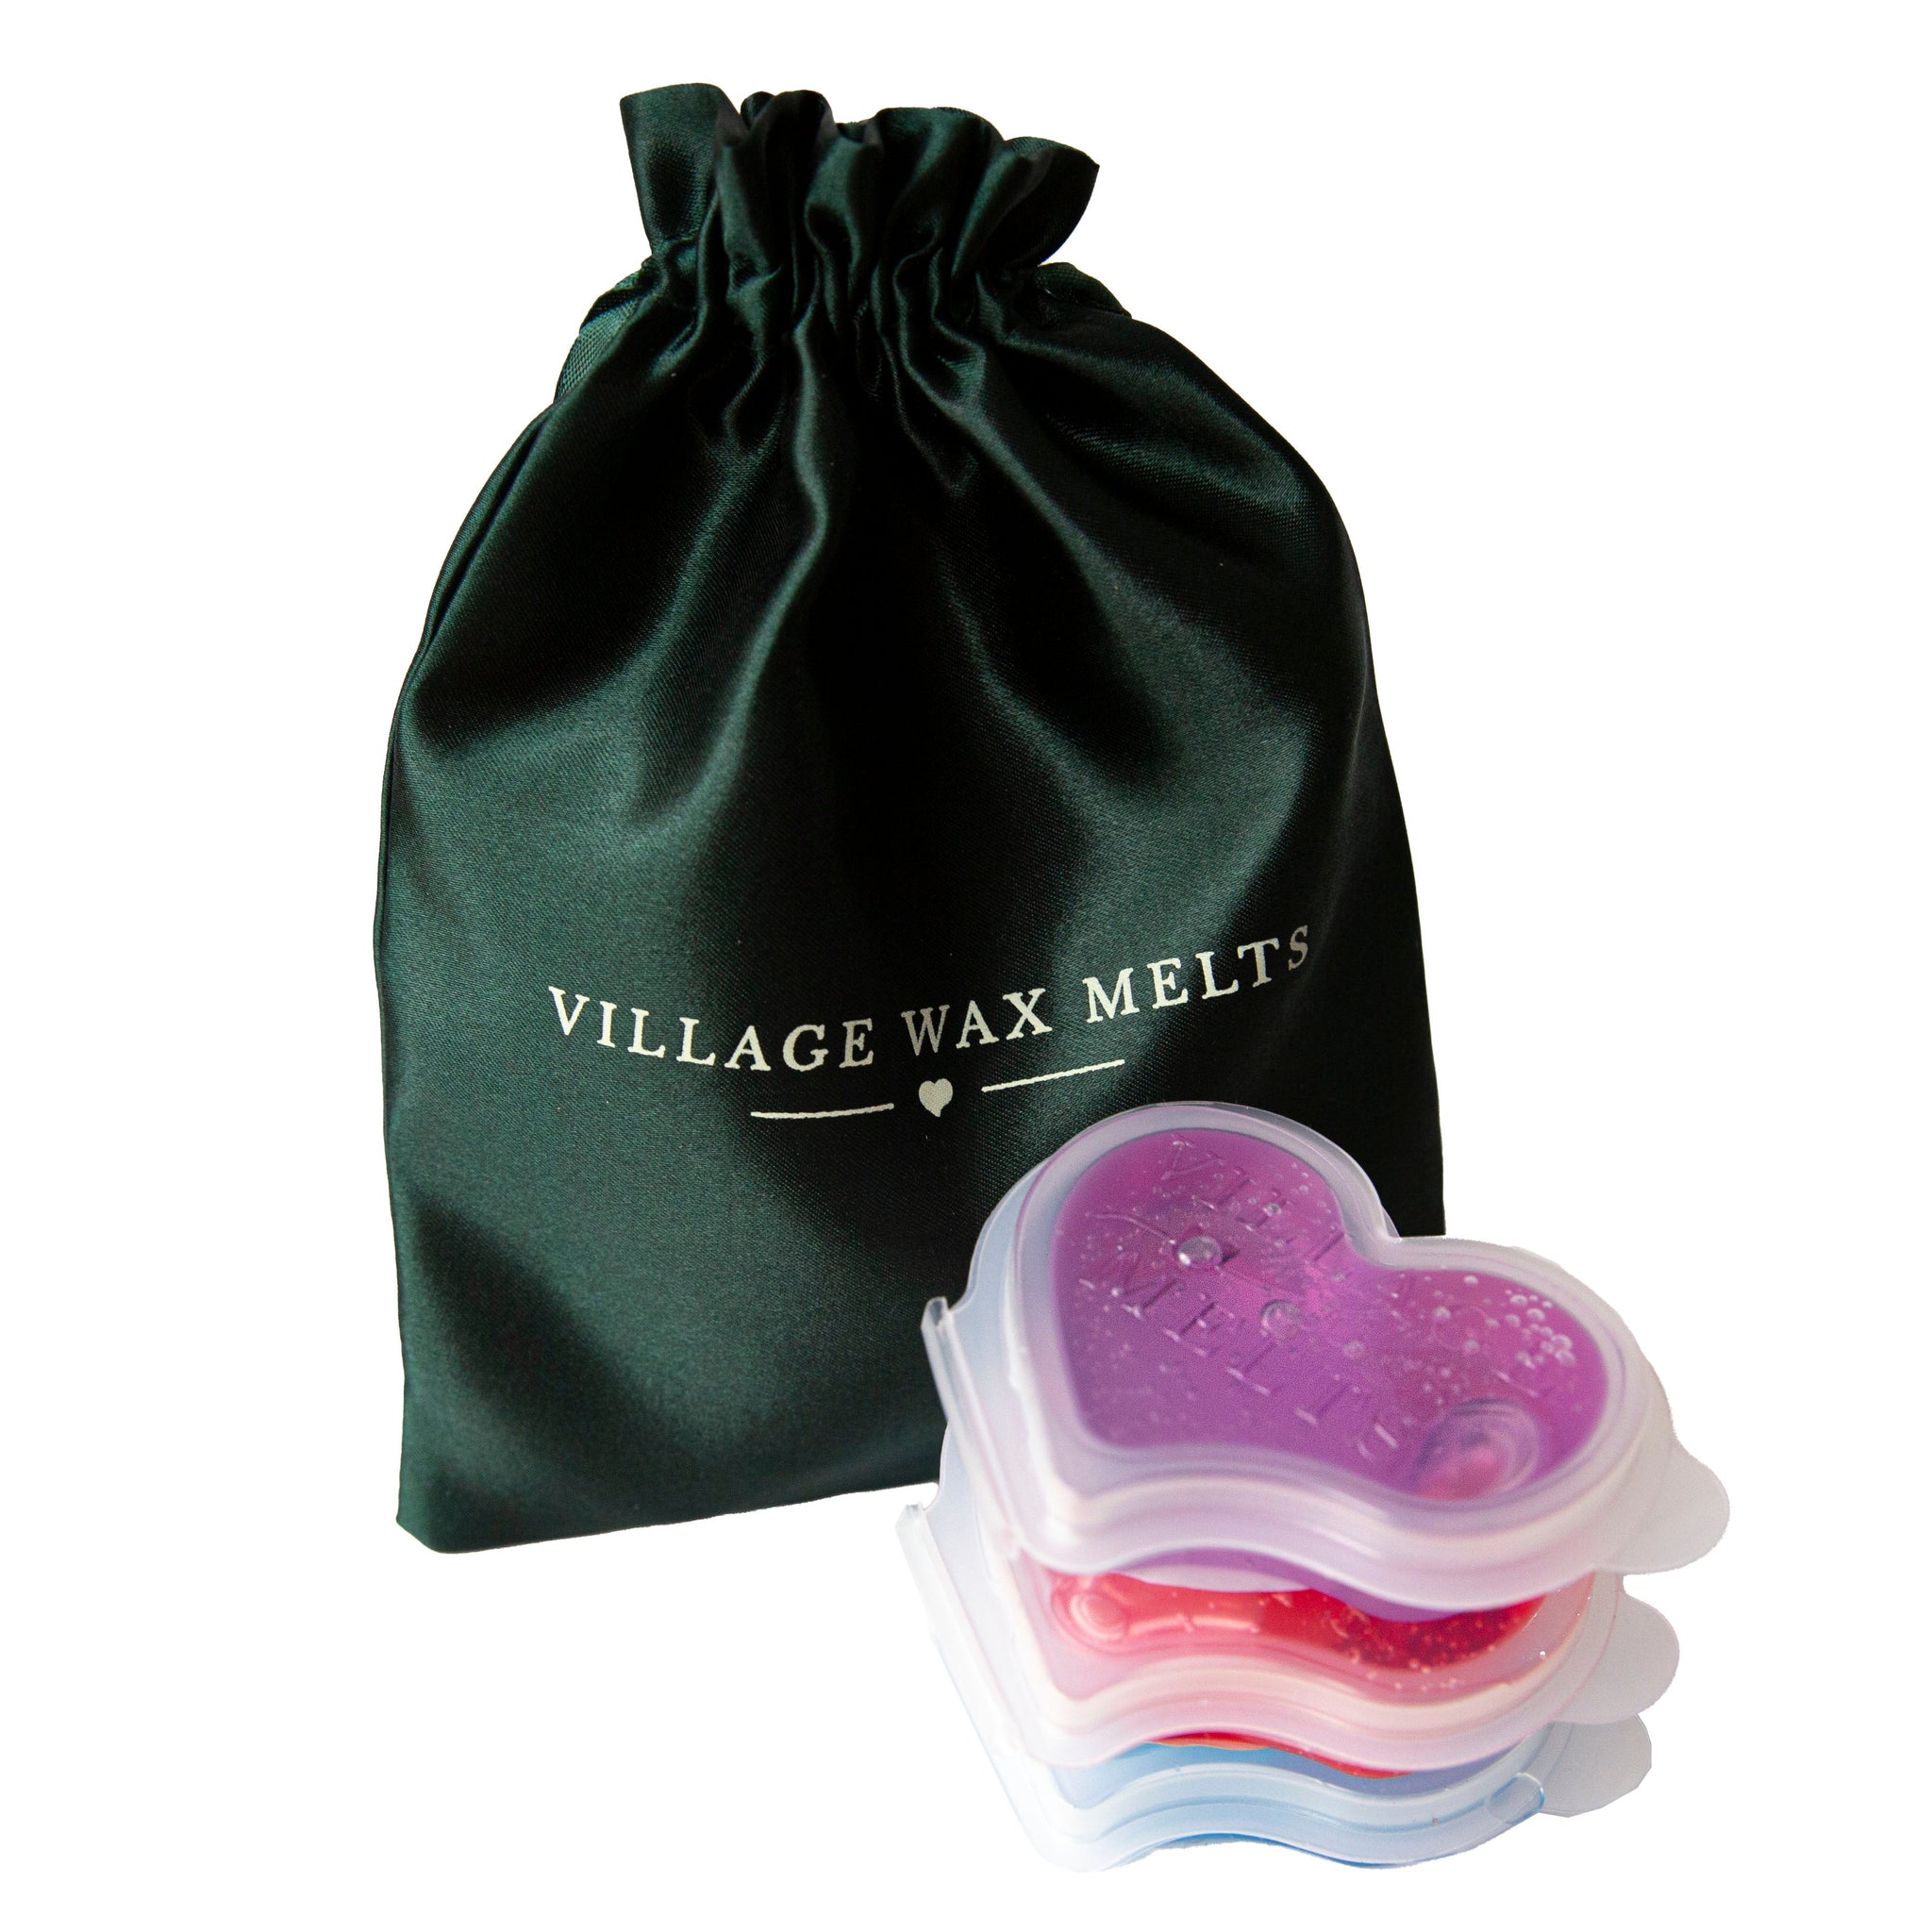 Introducing The Gel Wax Melt by Village Wax Melts - Parenting, Mental  Health & Lifestyle